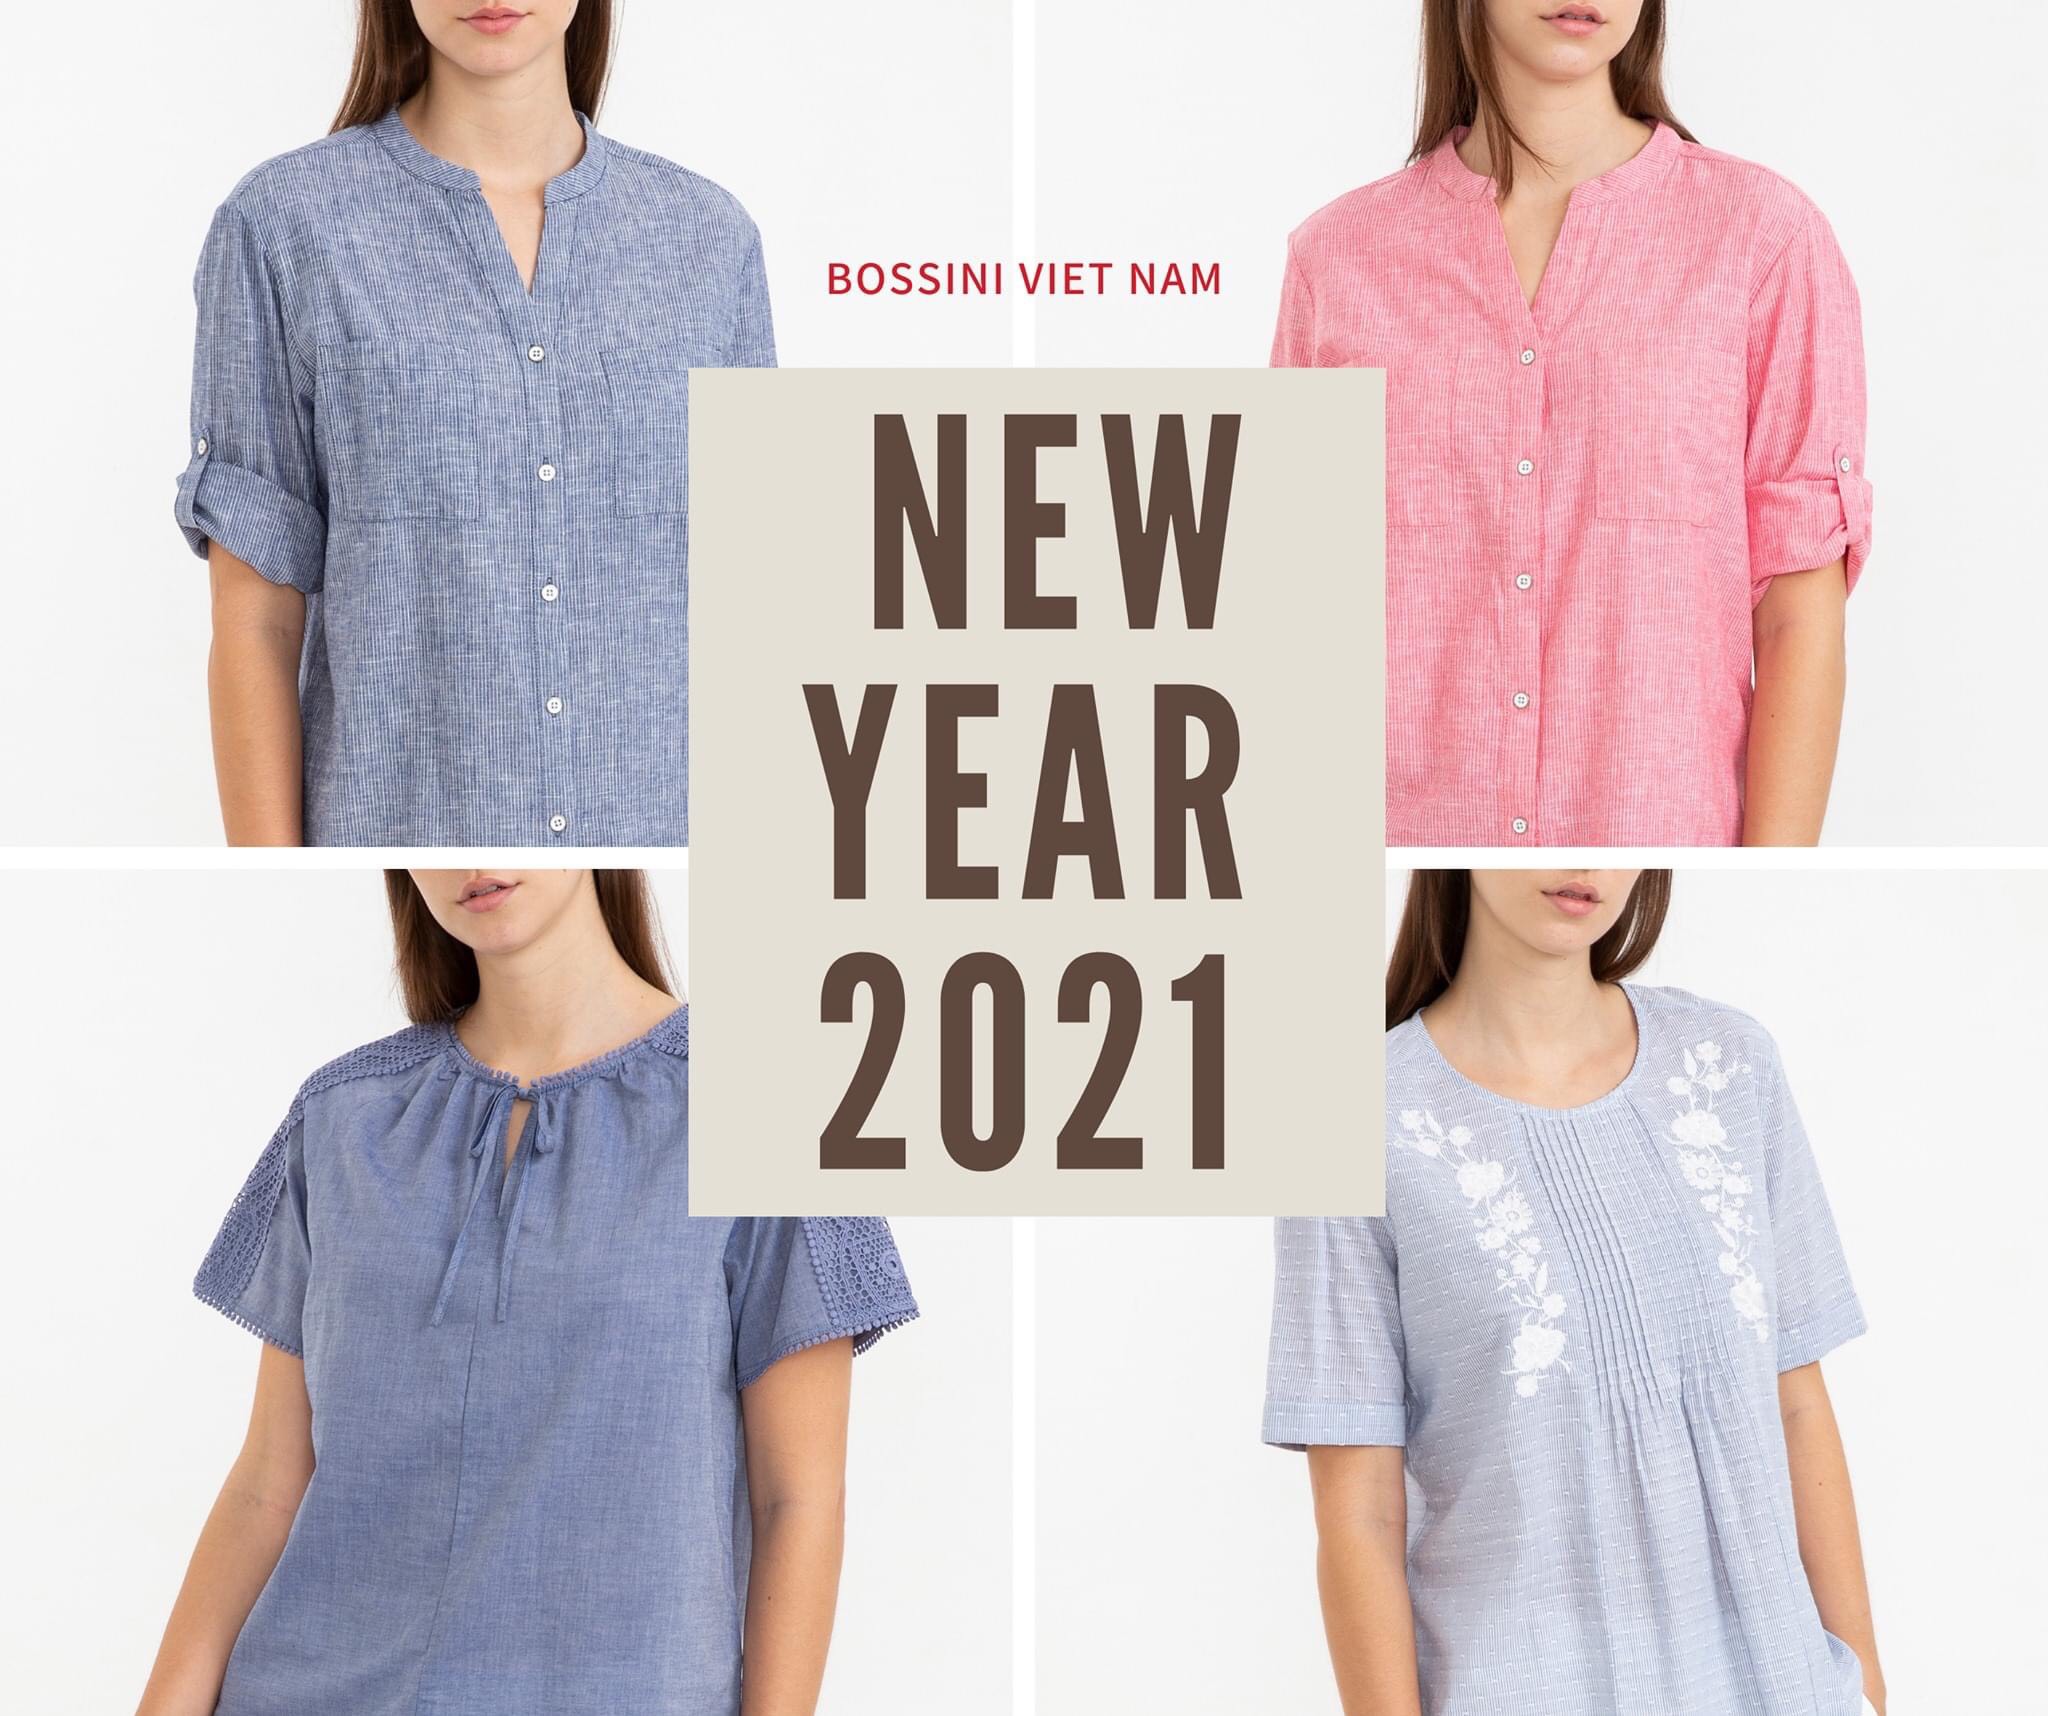 BOSSINI – NEW YEAR 2021 COLLECTION